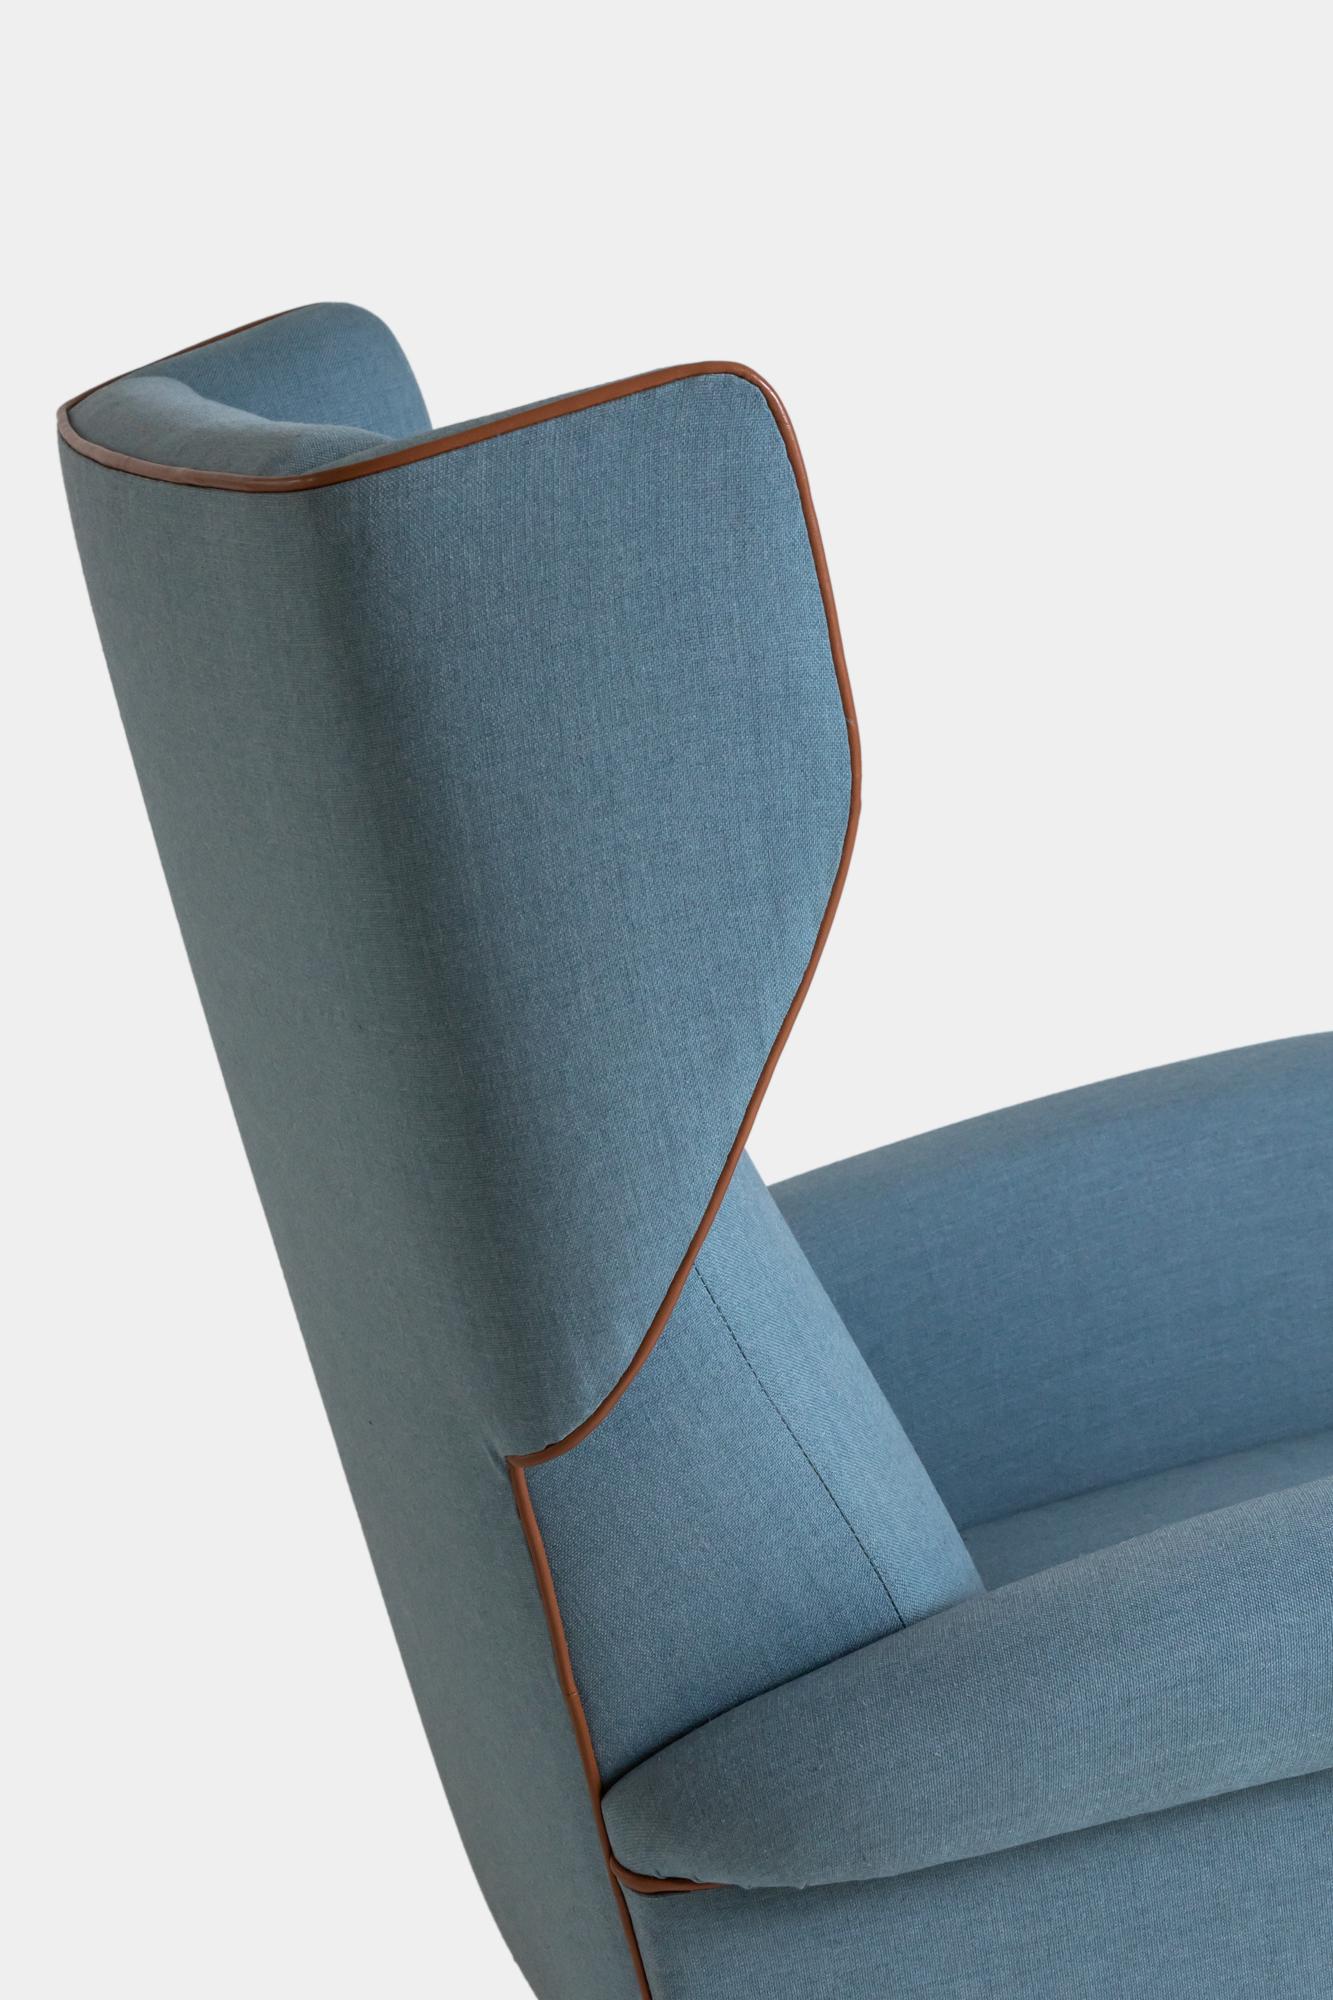 Mid-Century Modern Gio Ponti Lounge Chair in Light Blue Wool with Saddle Leather Piping